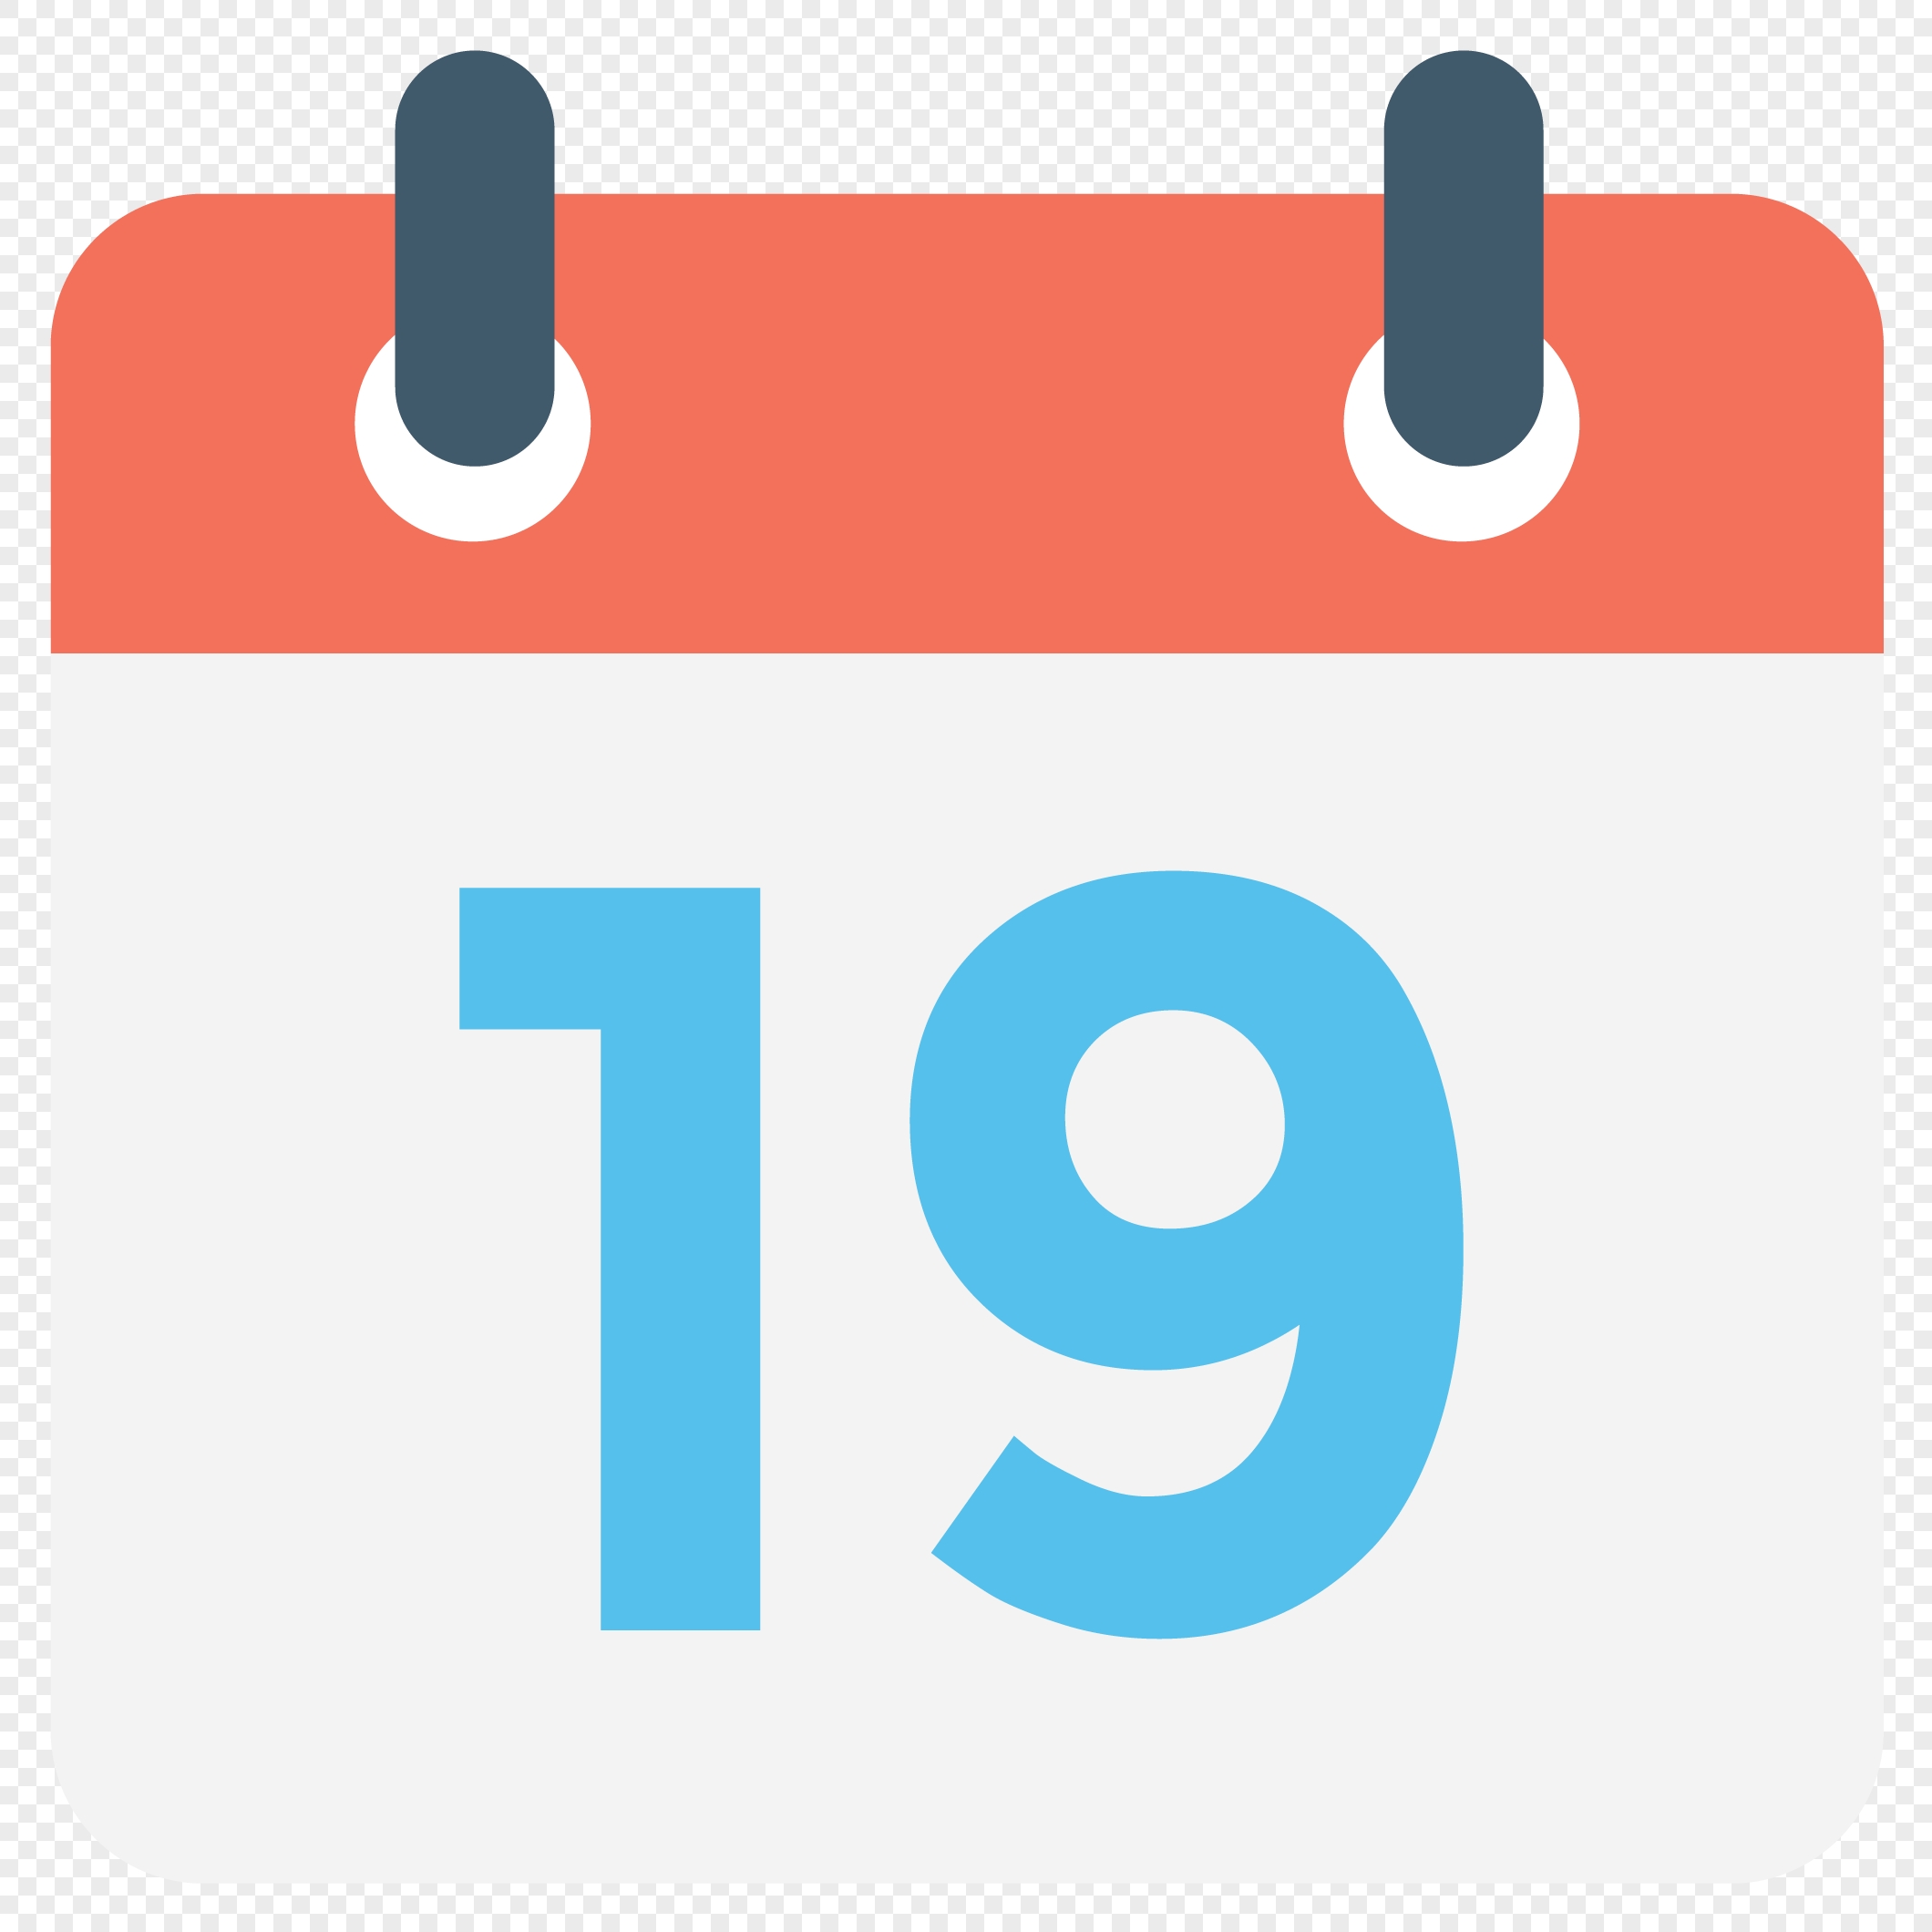 Calendar Icon Png Image_Picture Free Download 400525706_Lovepik Calendar Icon Blue Png